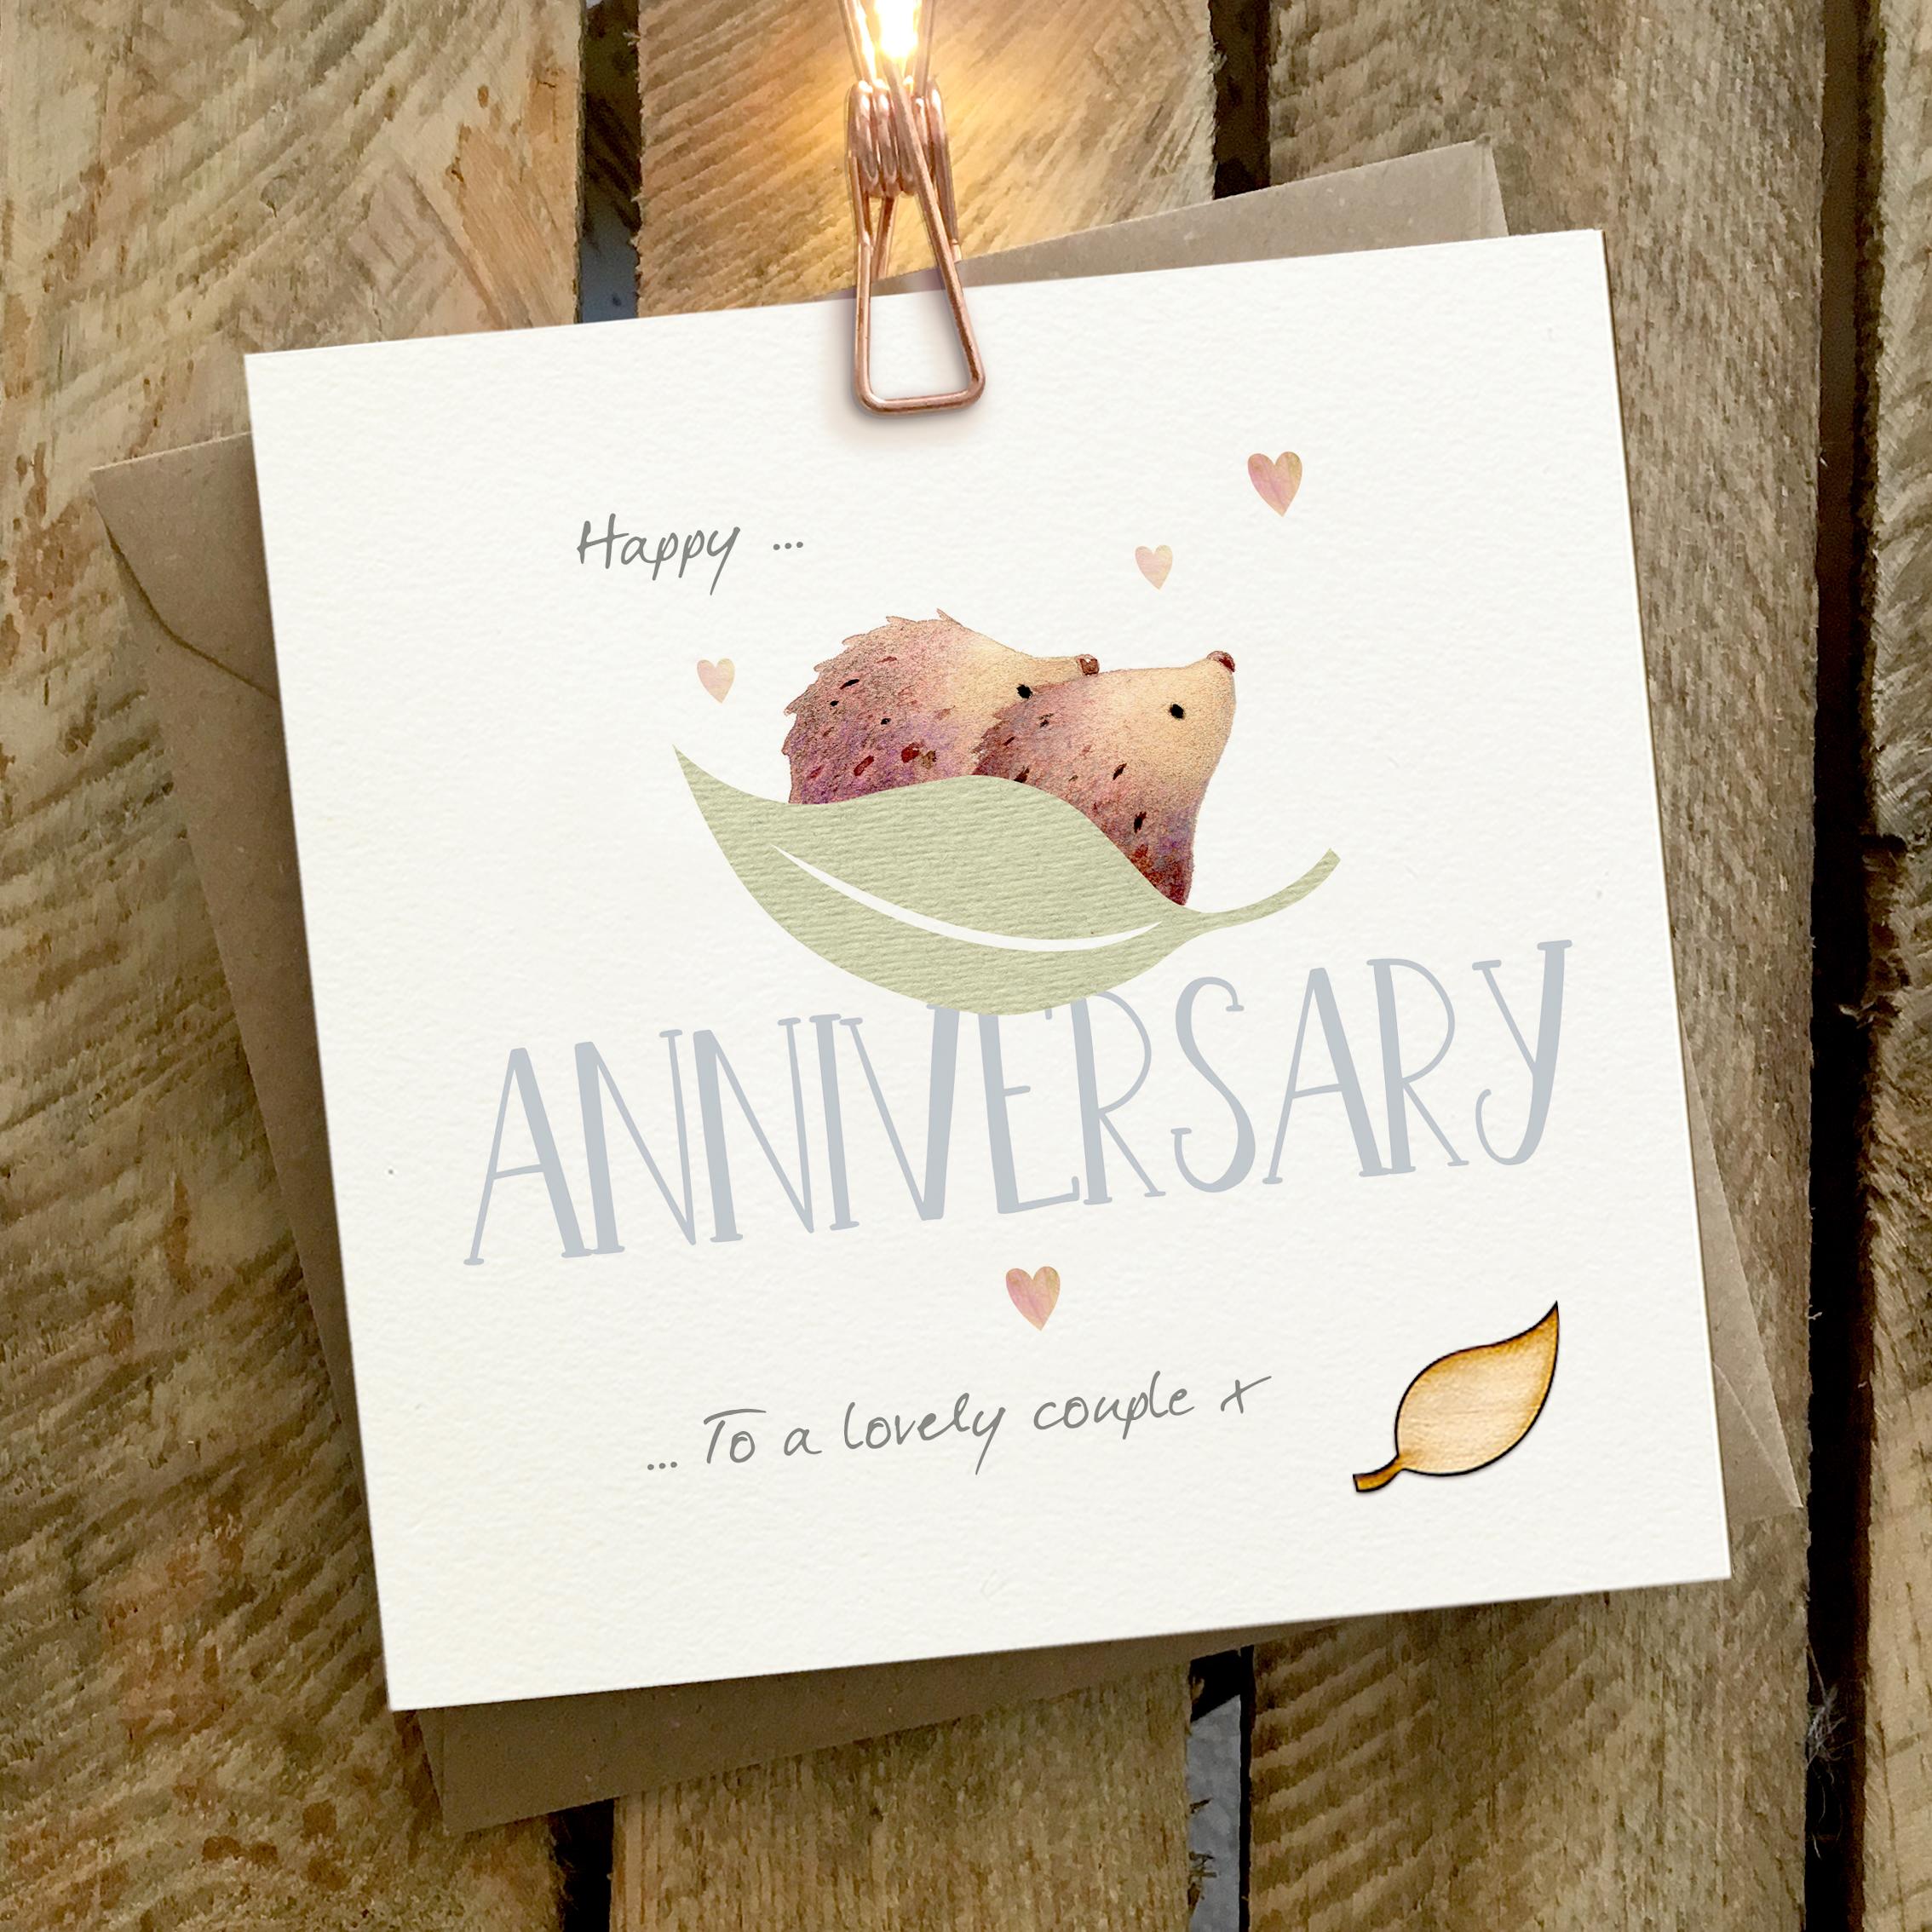 Card featuring two hedgehogs cuddling on a large leaf, sitting on top of a large ANNIVERSARY caption